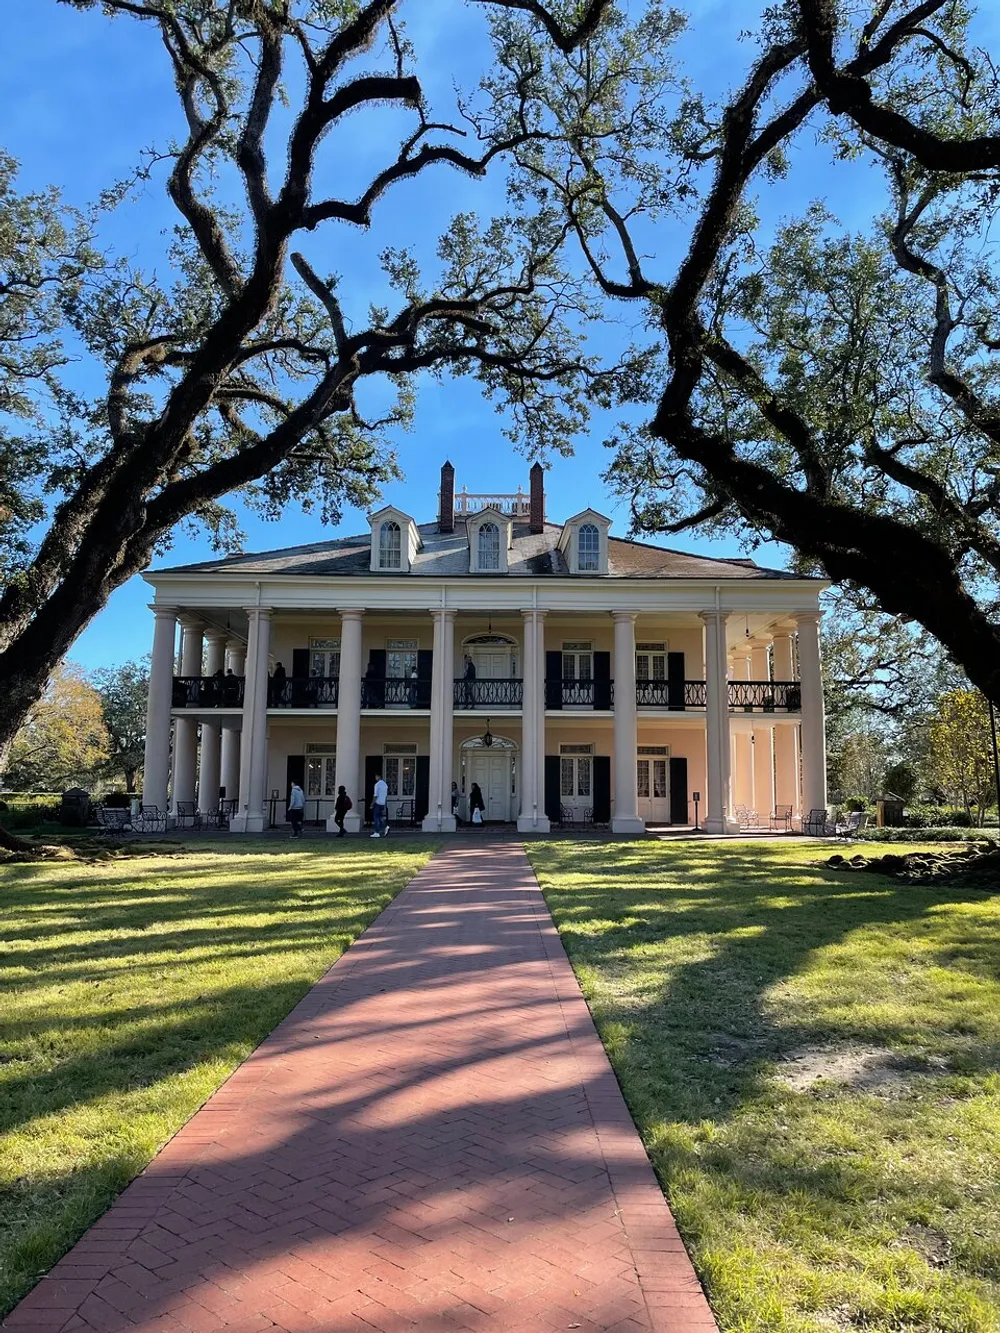 The image shows a grand historic mansion with a double-gallery porch framed by the gnarled branches of majestic oak trees under a blue sky